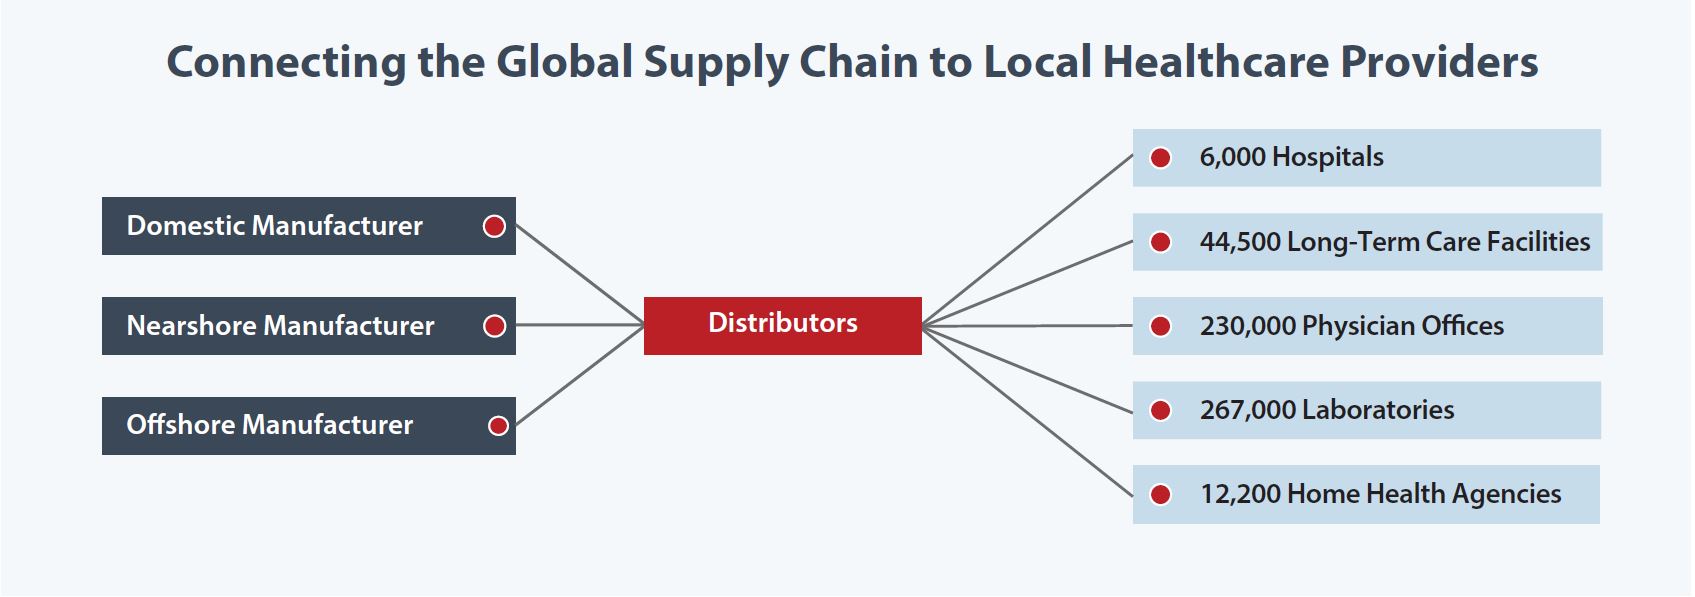 Connecting the Global Supply Chain to Local Health Providers (enable images to view visualization)